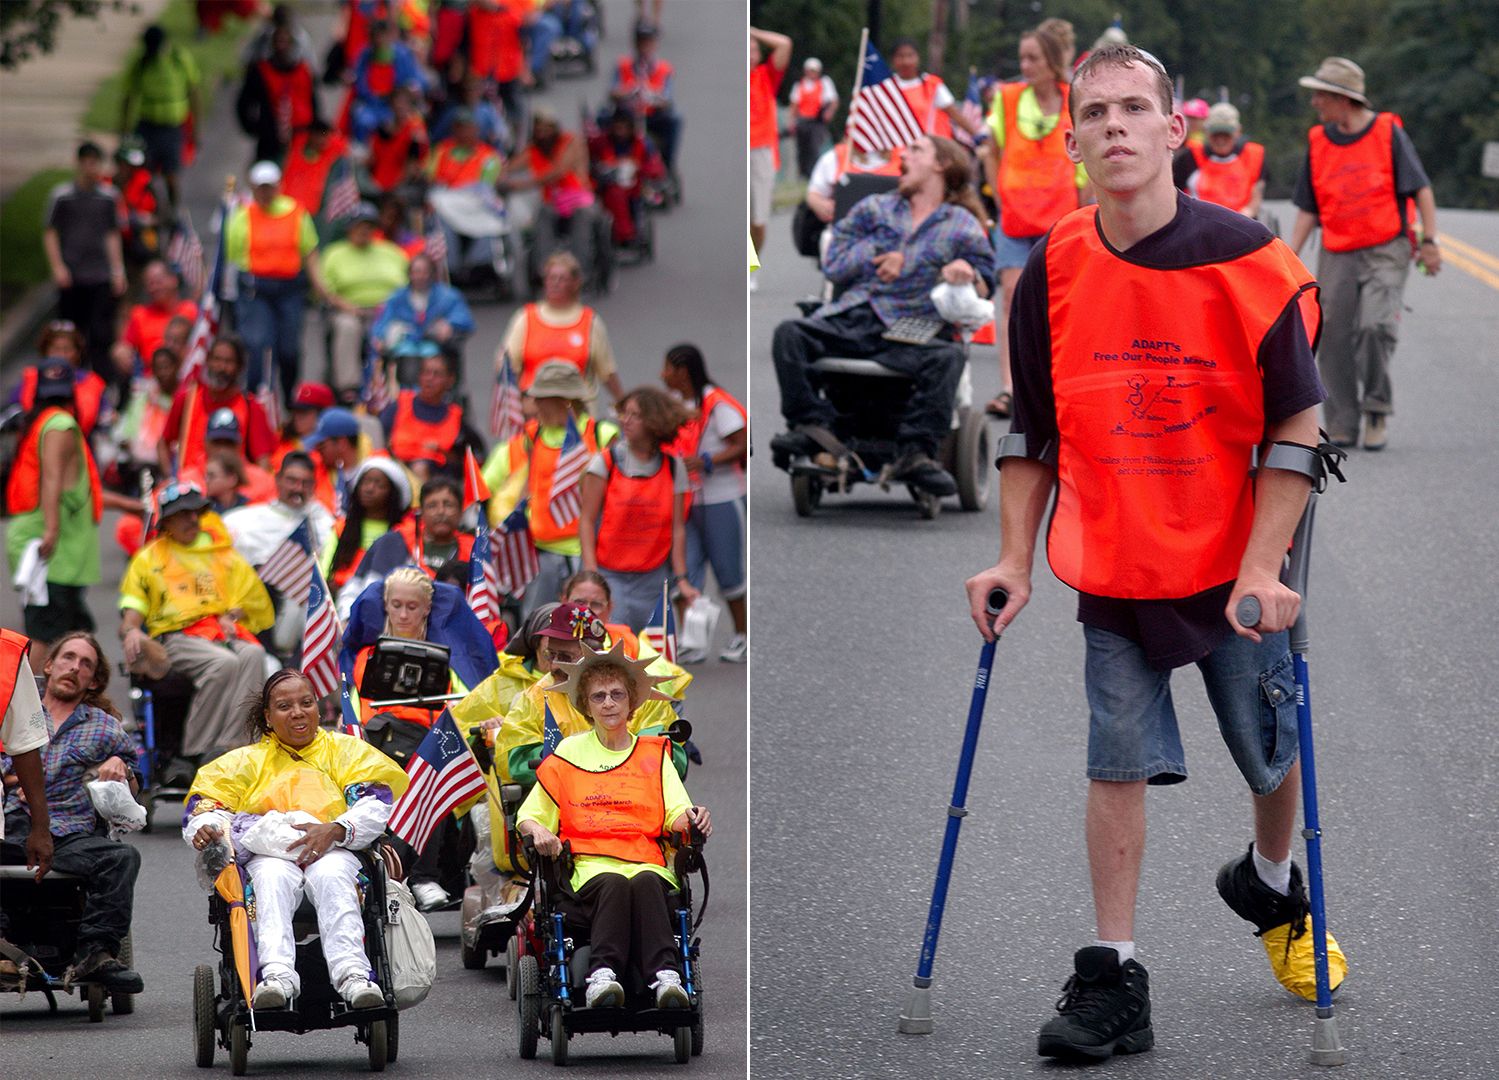 A diptych: on the left, a crowd of people in wheelchairs riding down the street. On the right: a person uses braces to walk down the street.